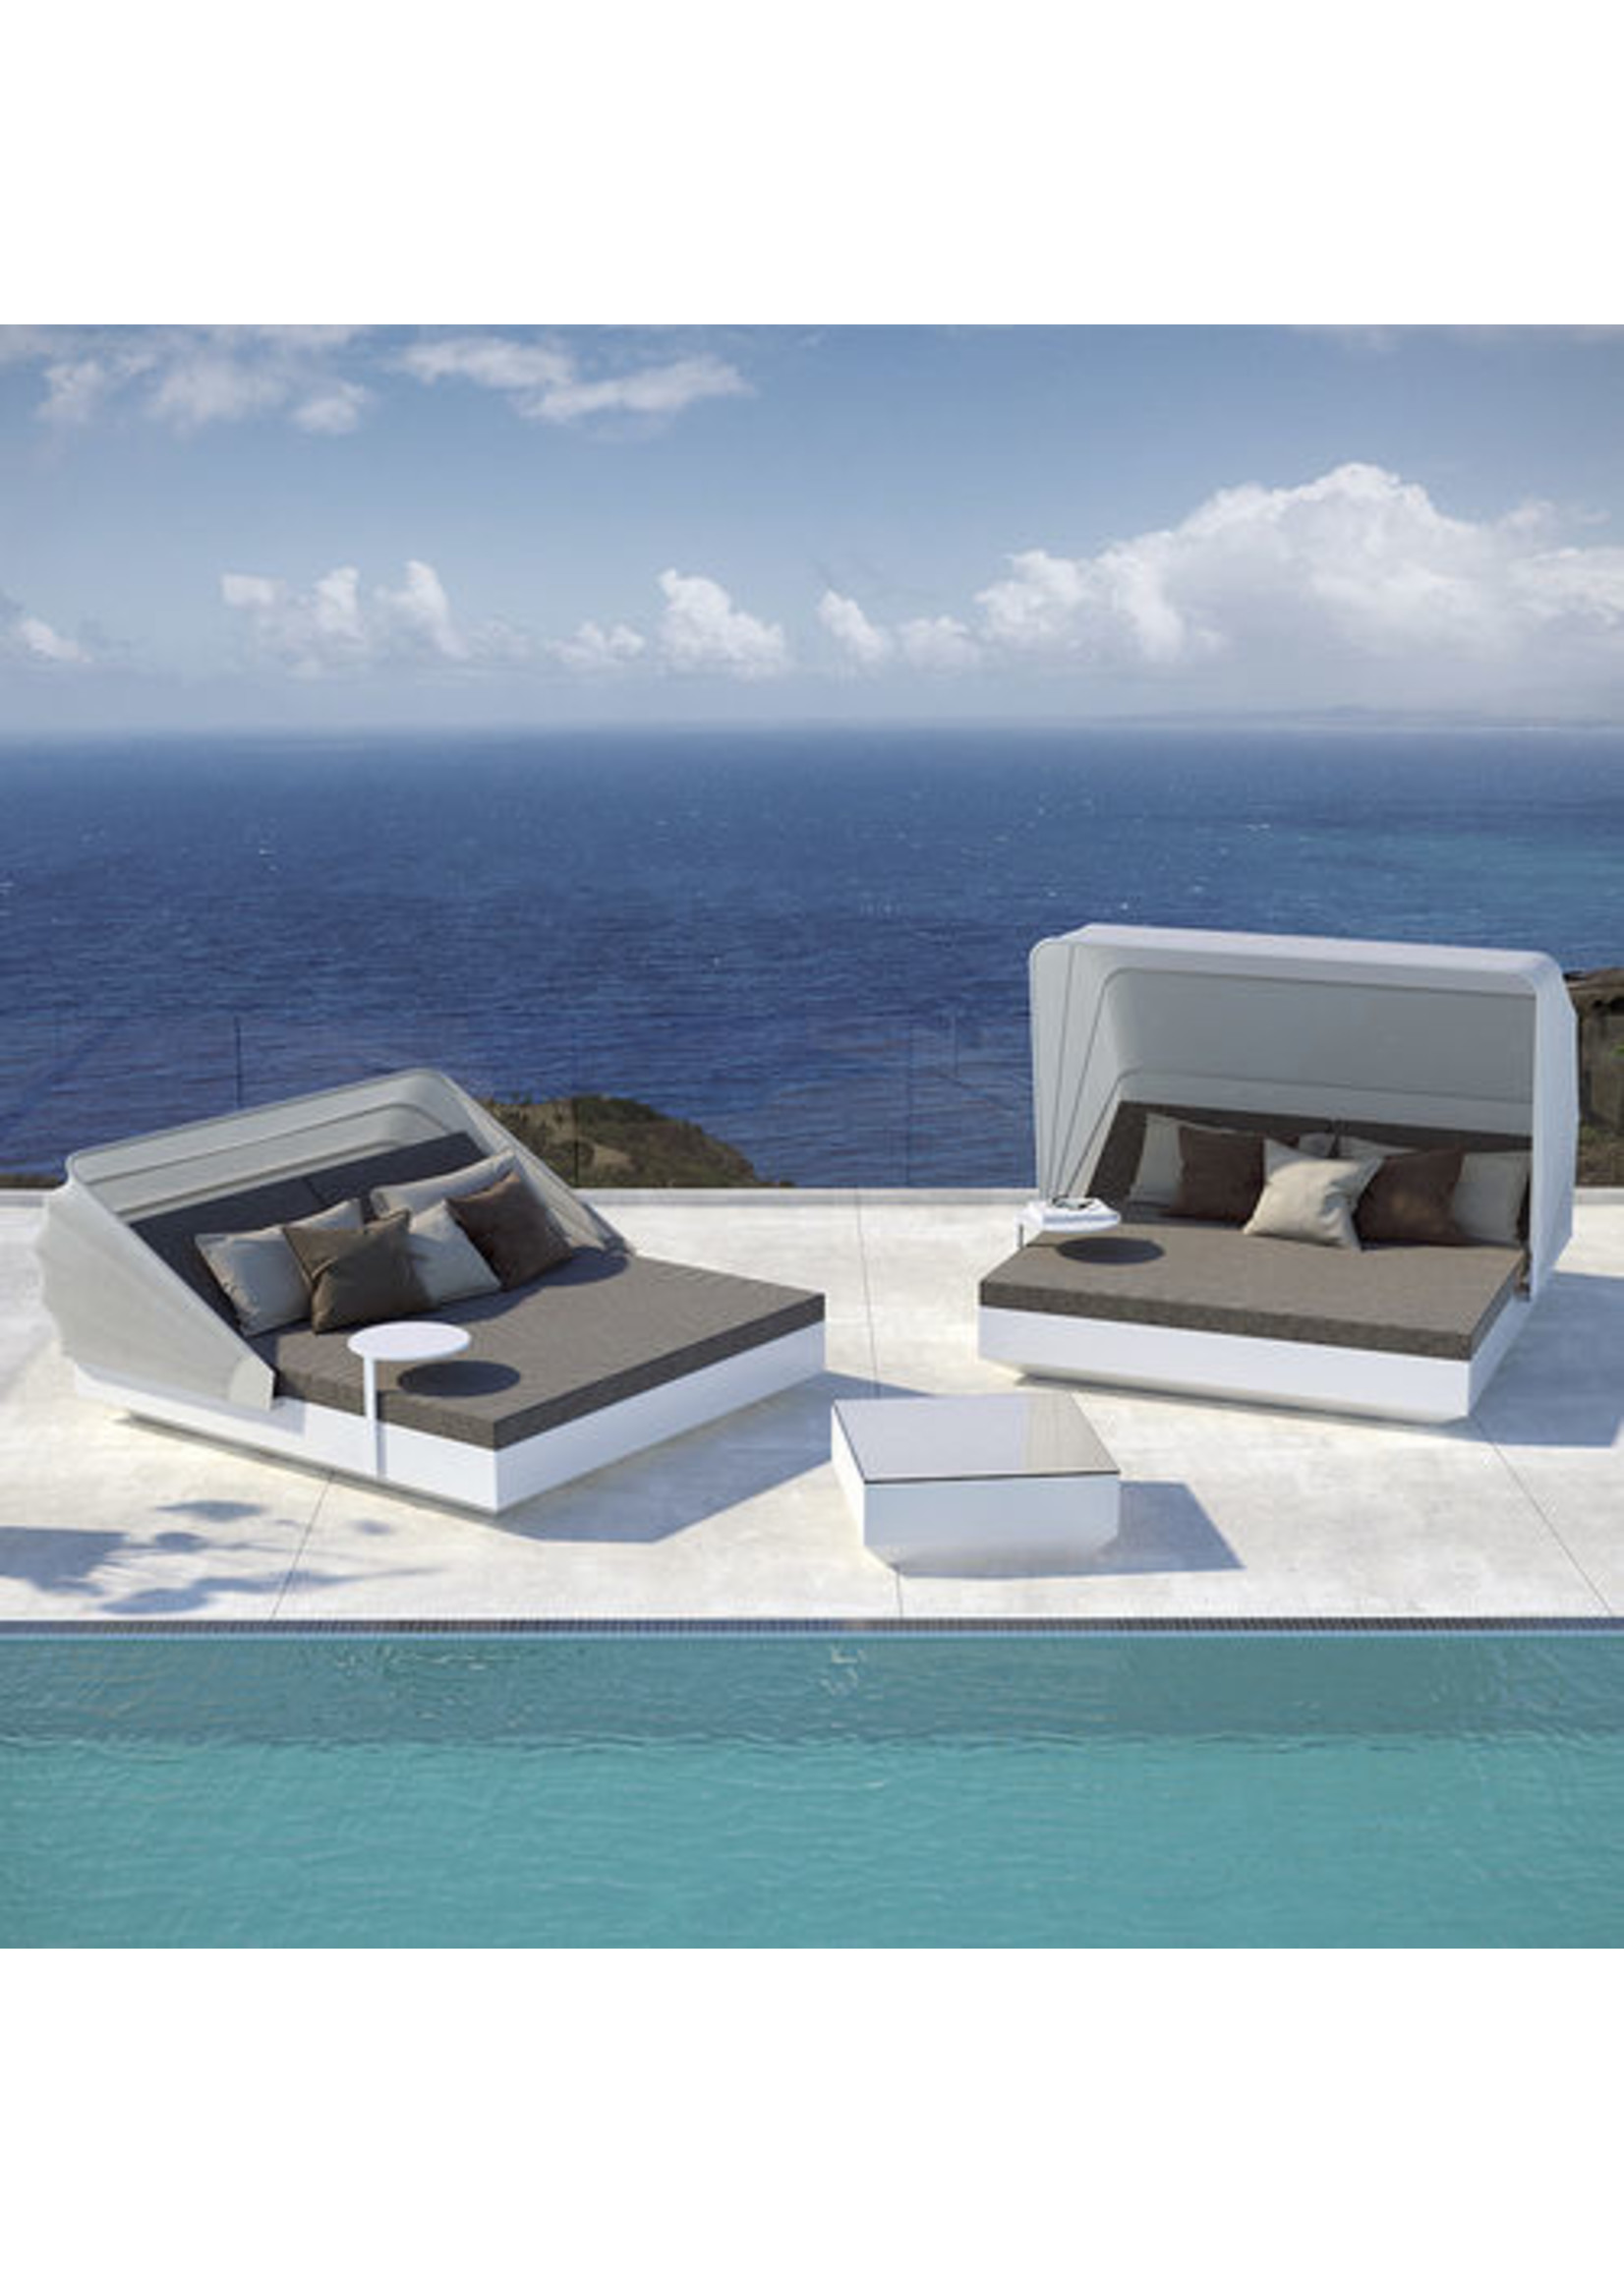 Vondom Vela Square Daybed with 2 reclining backrests + Sunroof